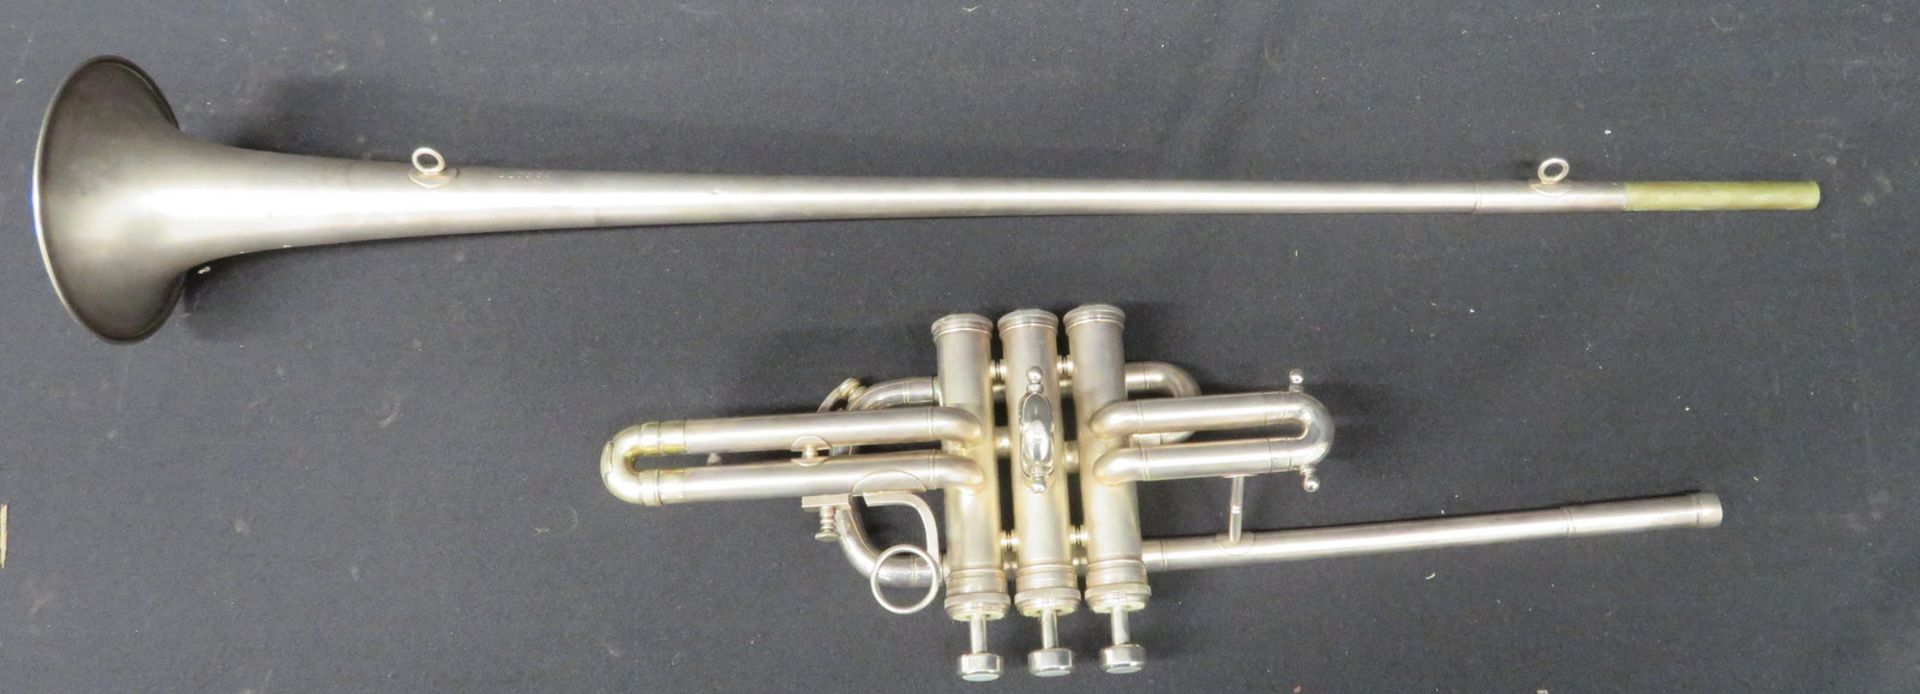 Boosey & Hawkes Imperial fanfare trumpet with case. Serial number: 622077. - Image 17 of 19